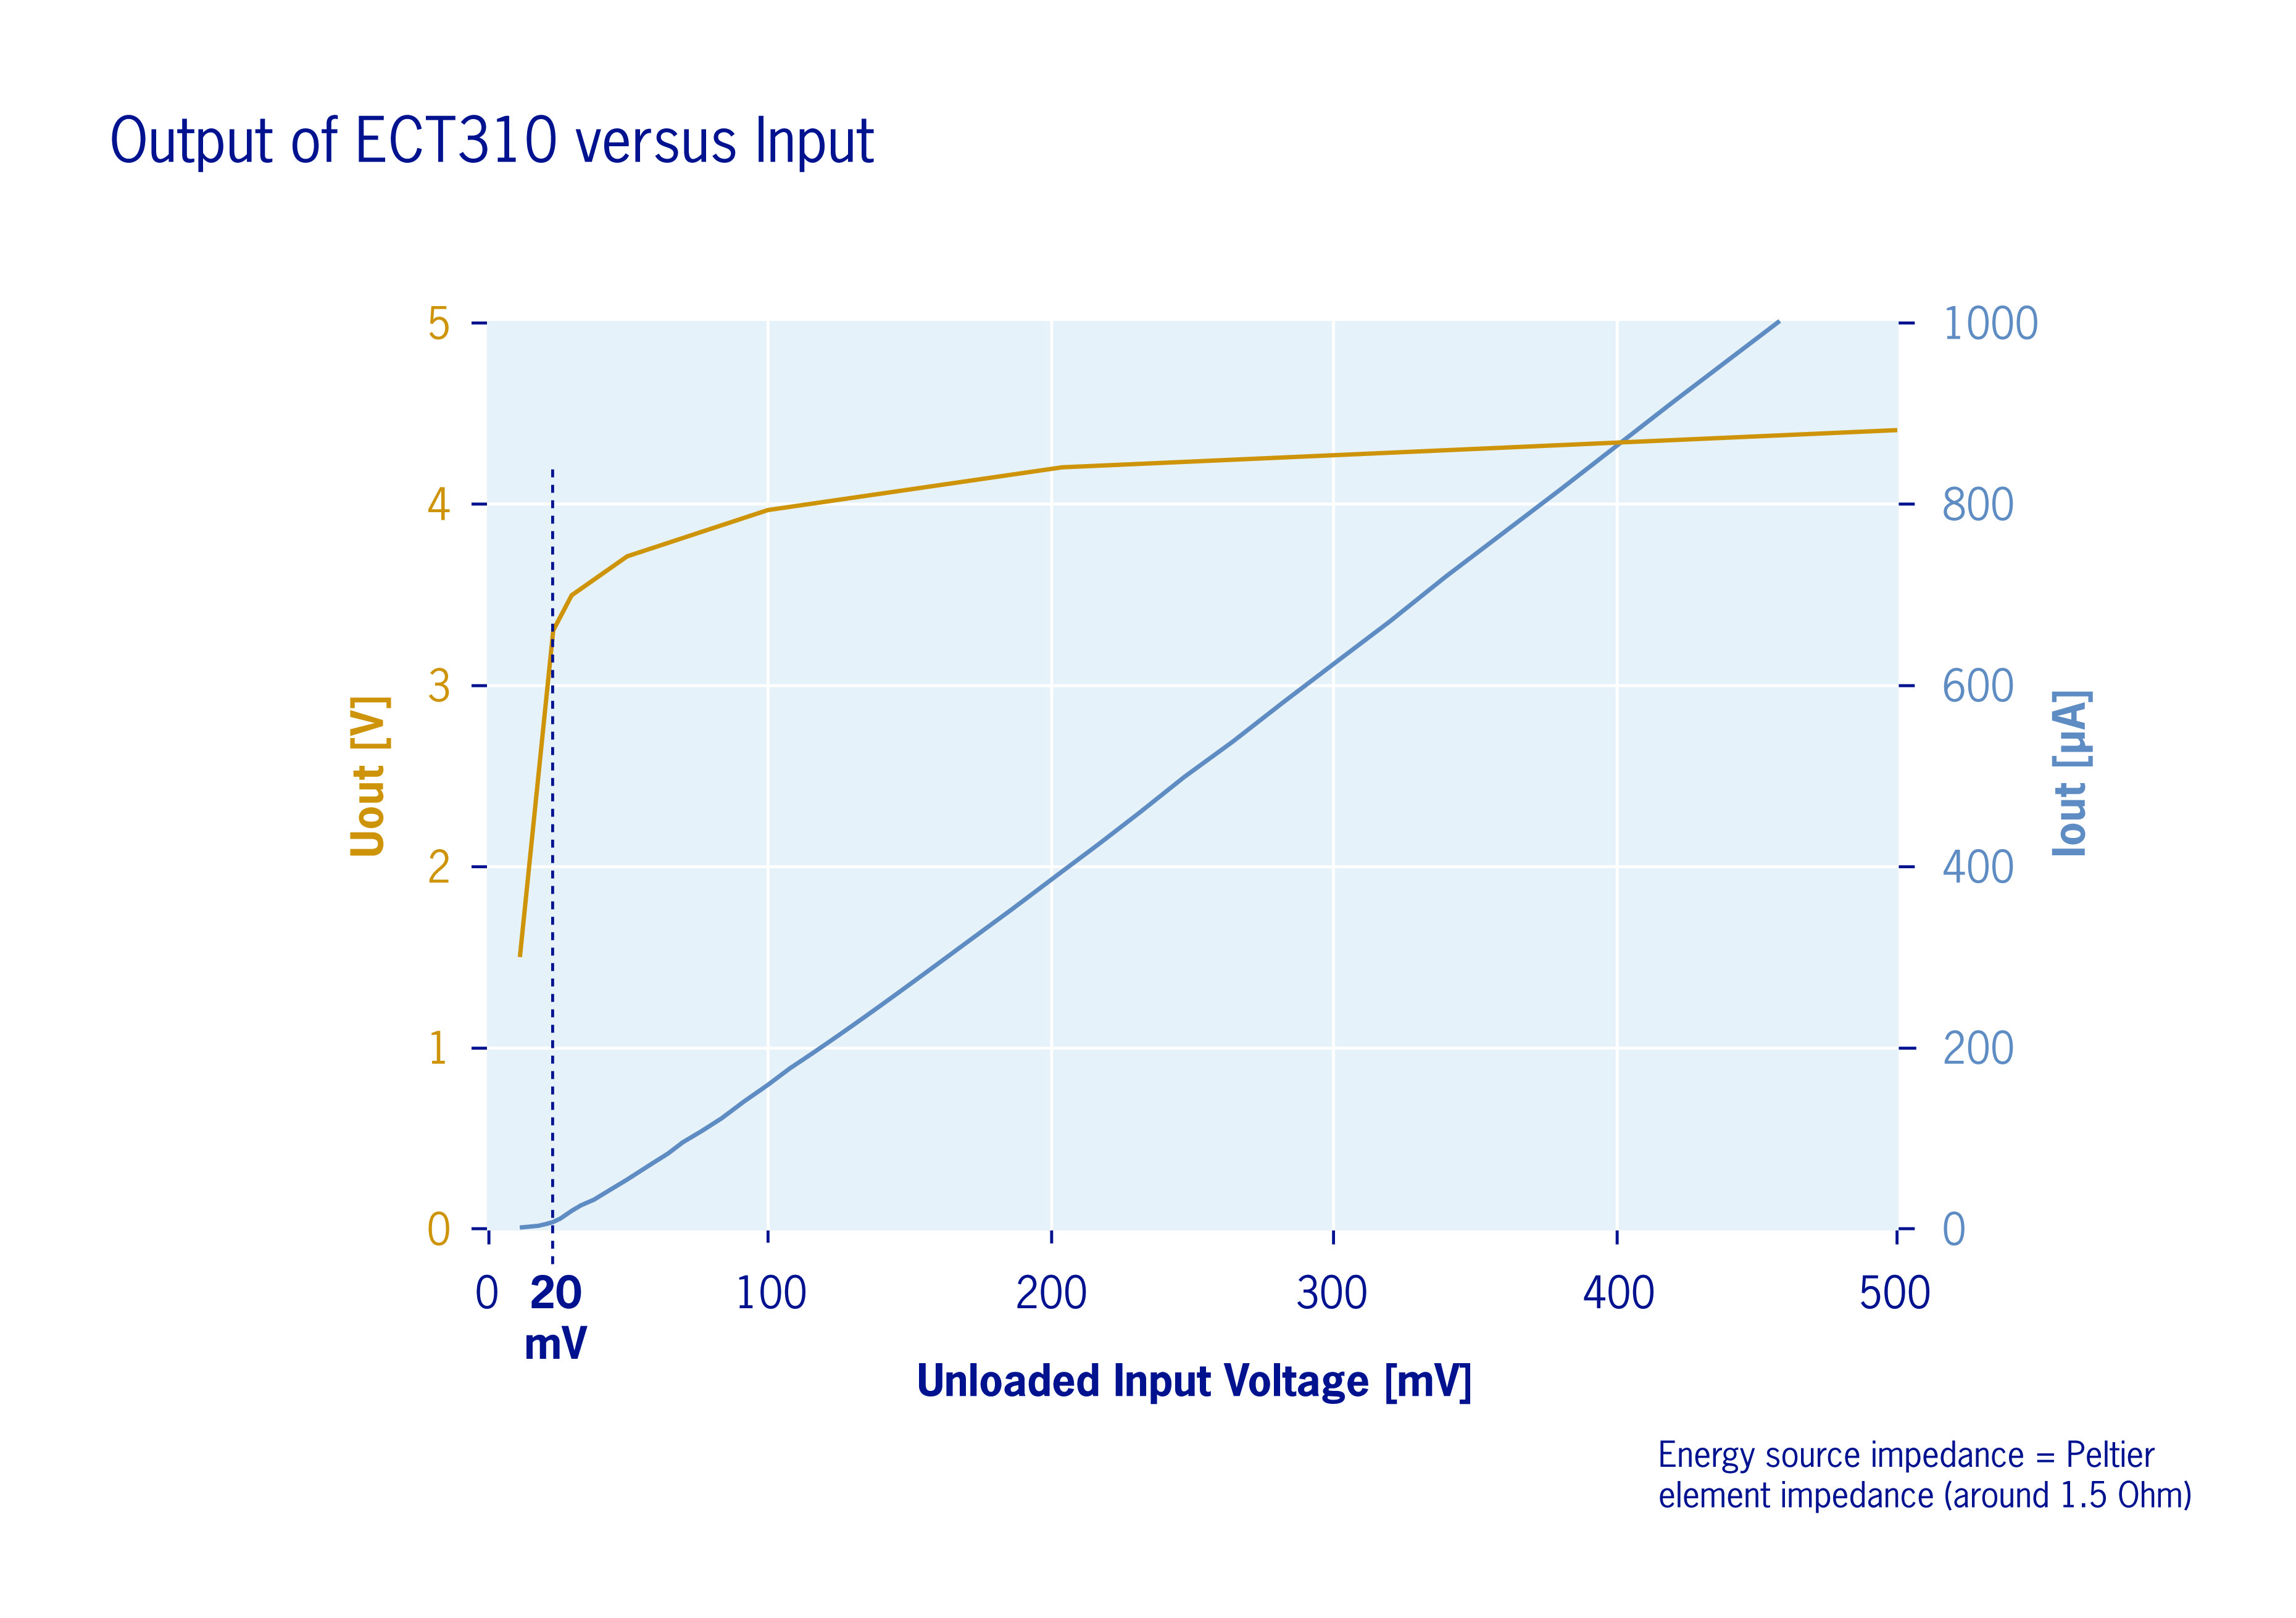 Figure 2: The ECT 310 provides ‘free’ energy through harvesting temperature differences